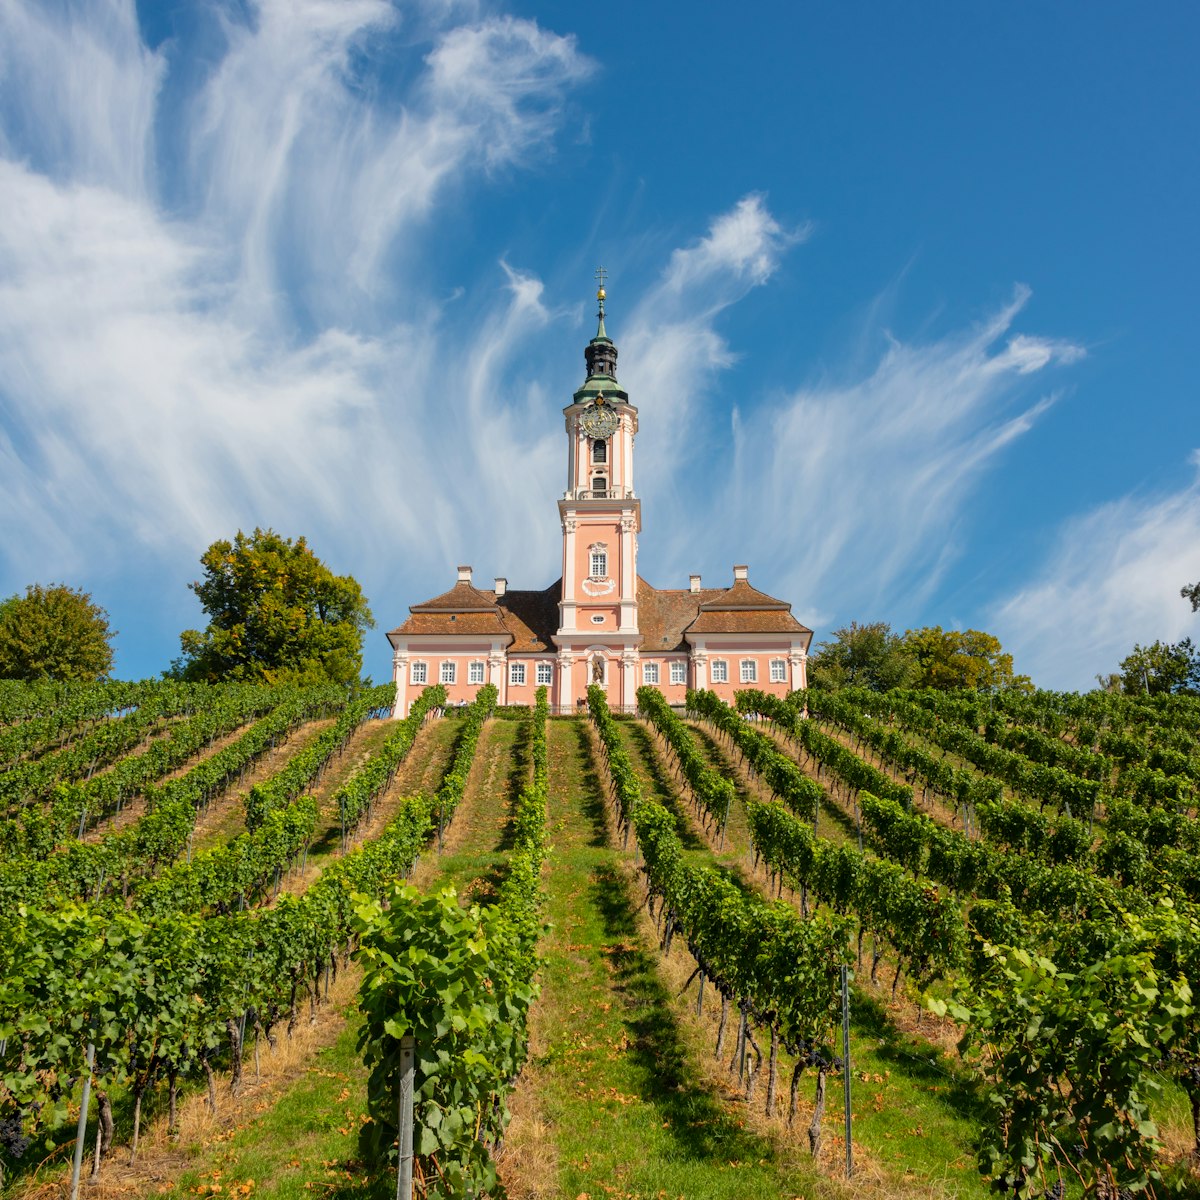 Beautiful view of the pilgrimage church in Birnau at Lake Constance with the vines in the foreground with a spectacular sky and clouds
1034849094
white, vineyards, uhldingen, stone, sight, rose, region, place, pink, landmark, green, famouse, destination, constance, clouds, building, birnau, beautiful, baroque